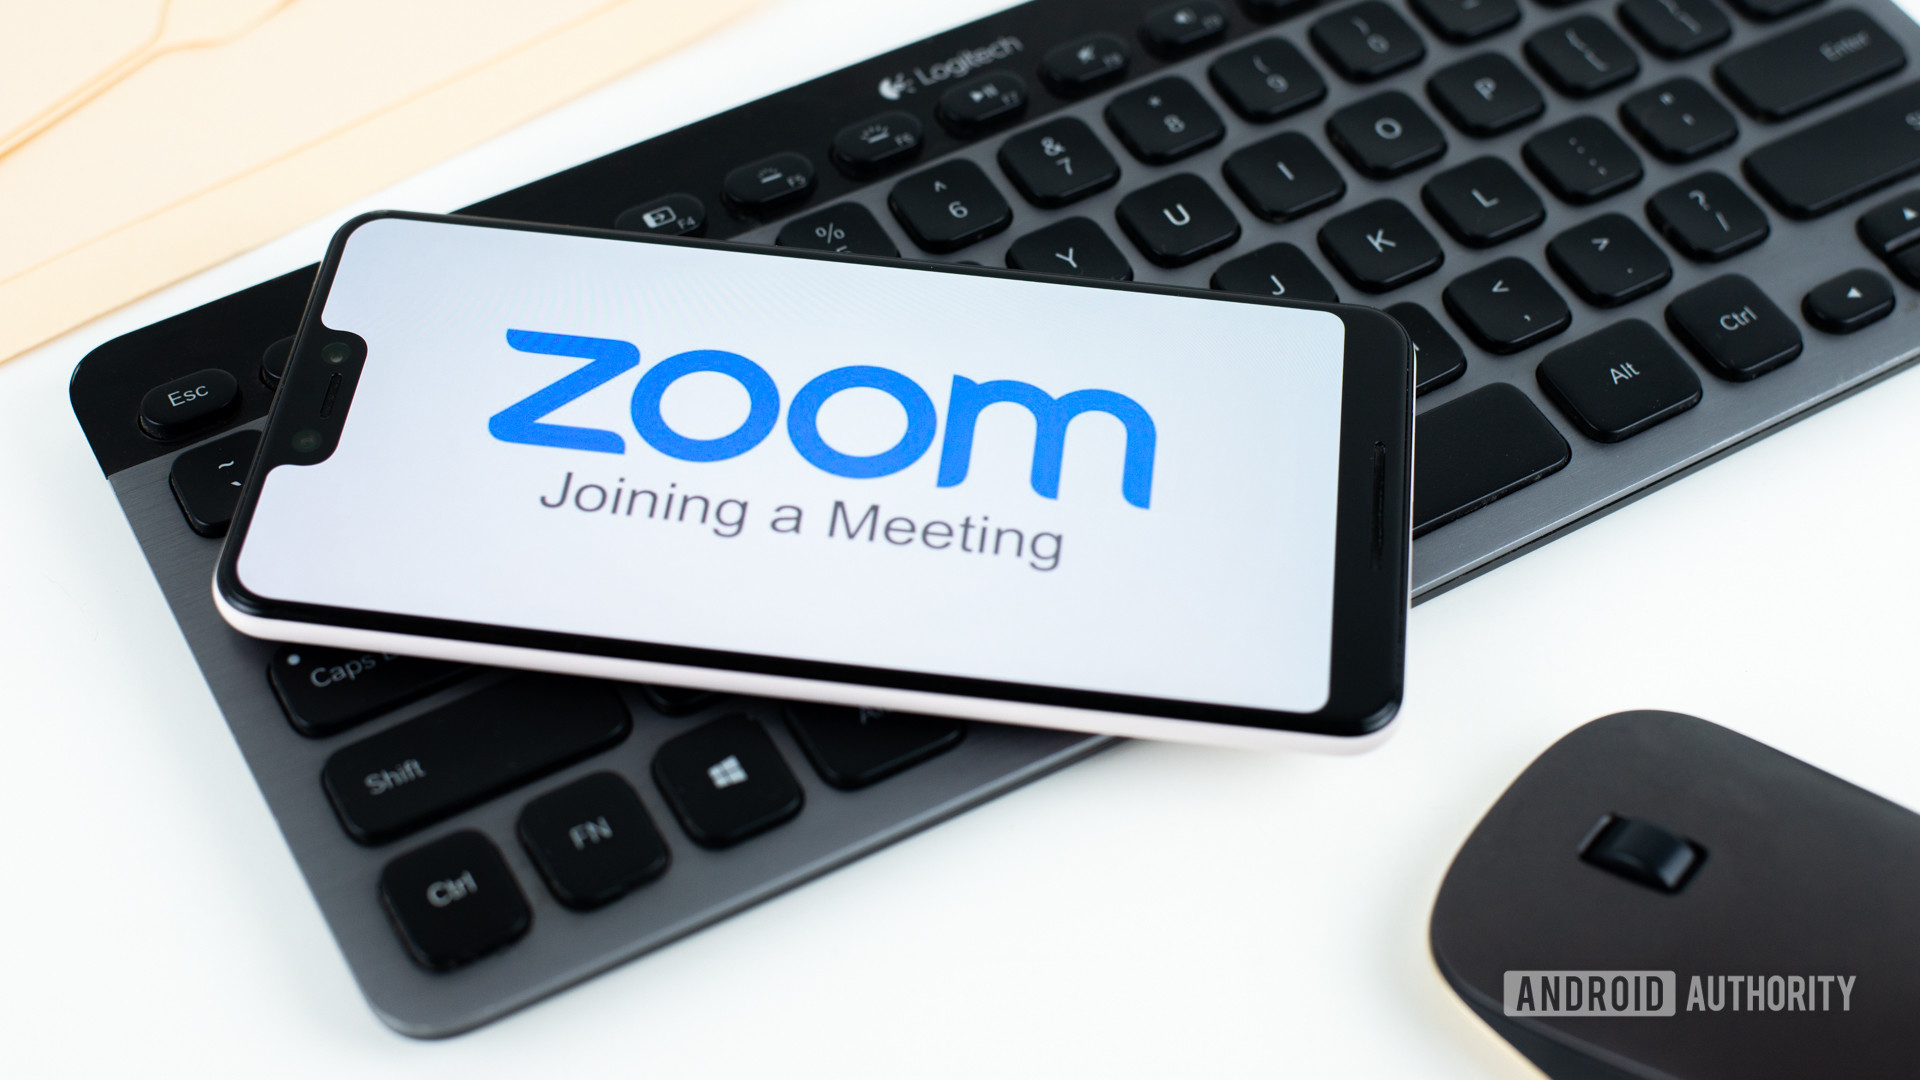 How to share your screen in Zoom meetings